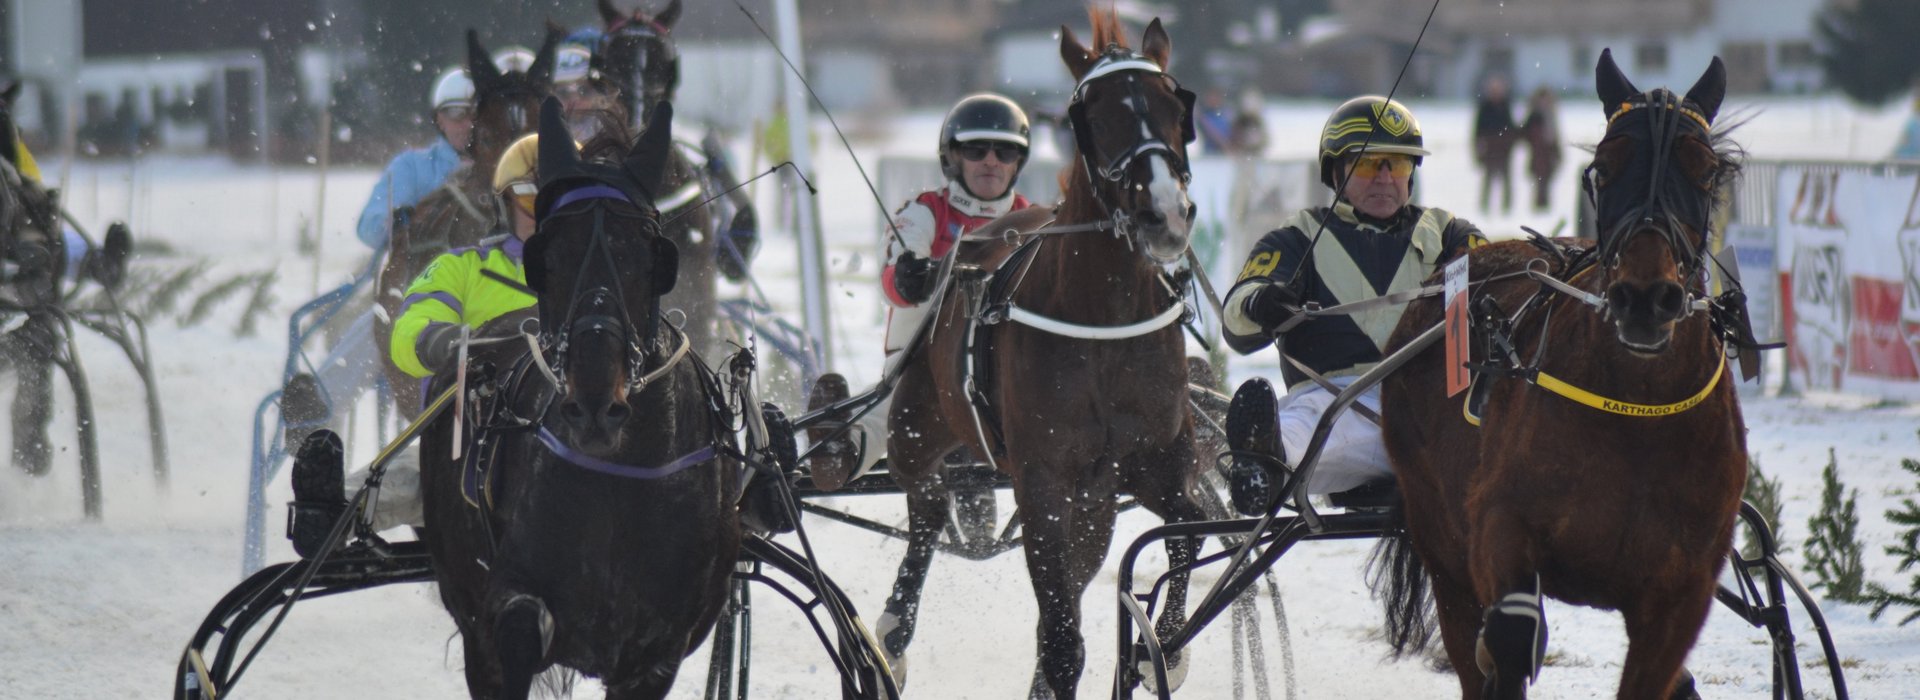 Harness Horse Racing 3 Horses competing